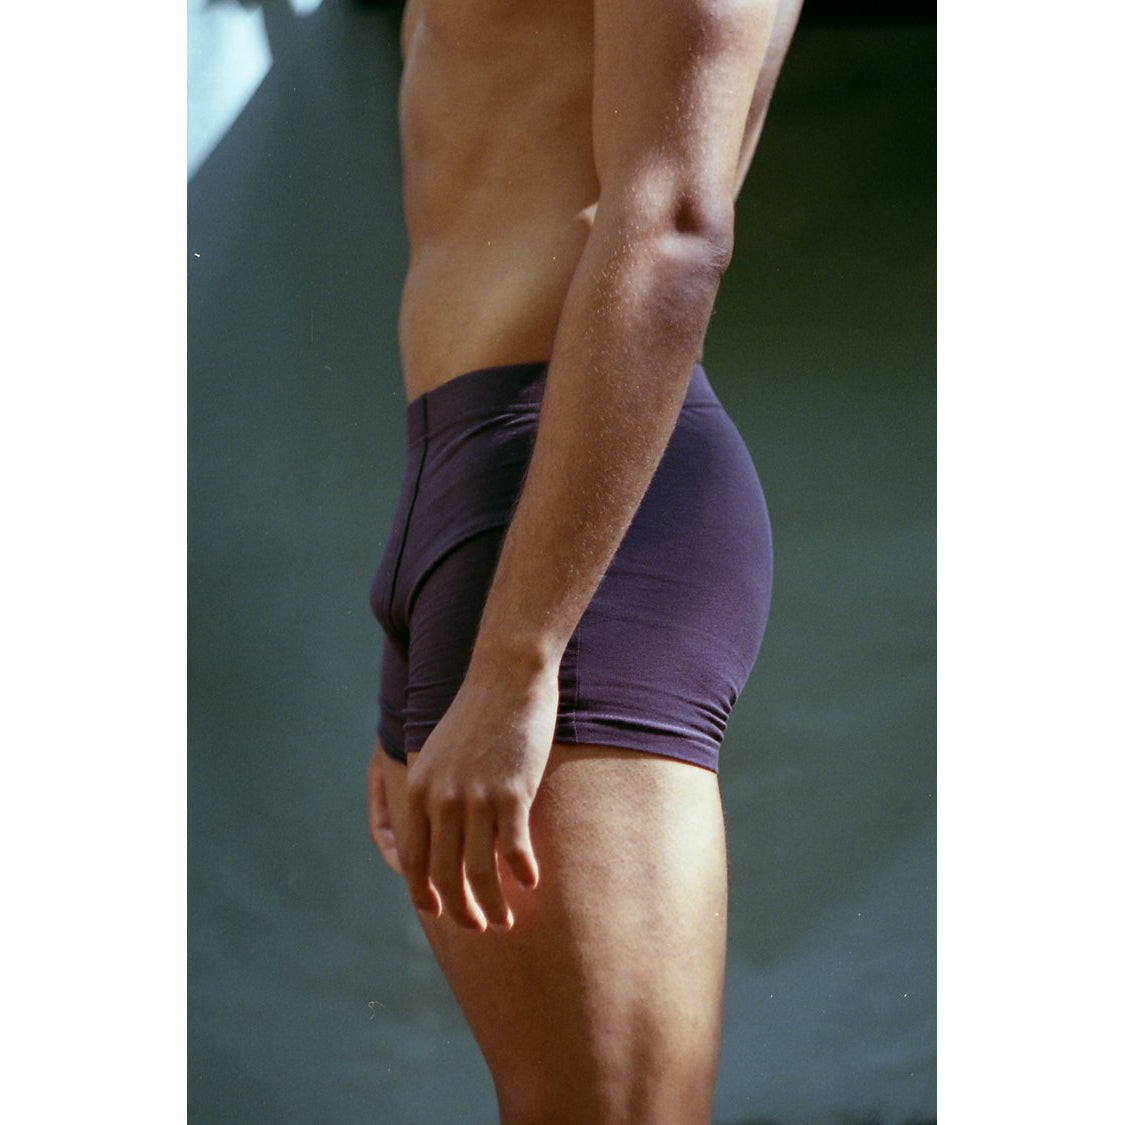 Load image into Gallery viewer, Project Pico Cotton Trunk Short Charcoal
